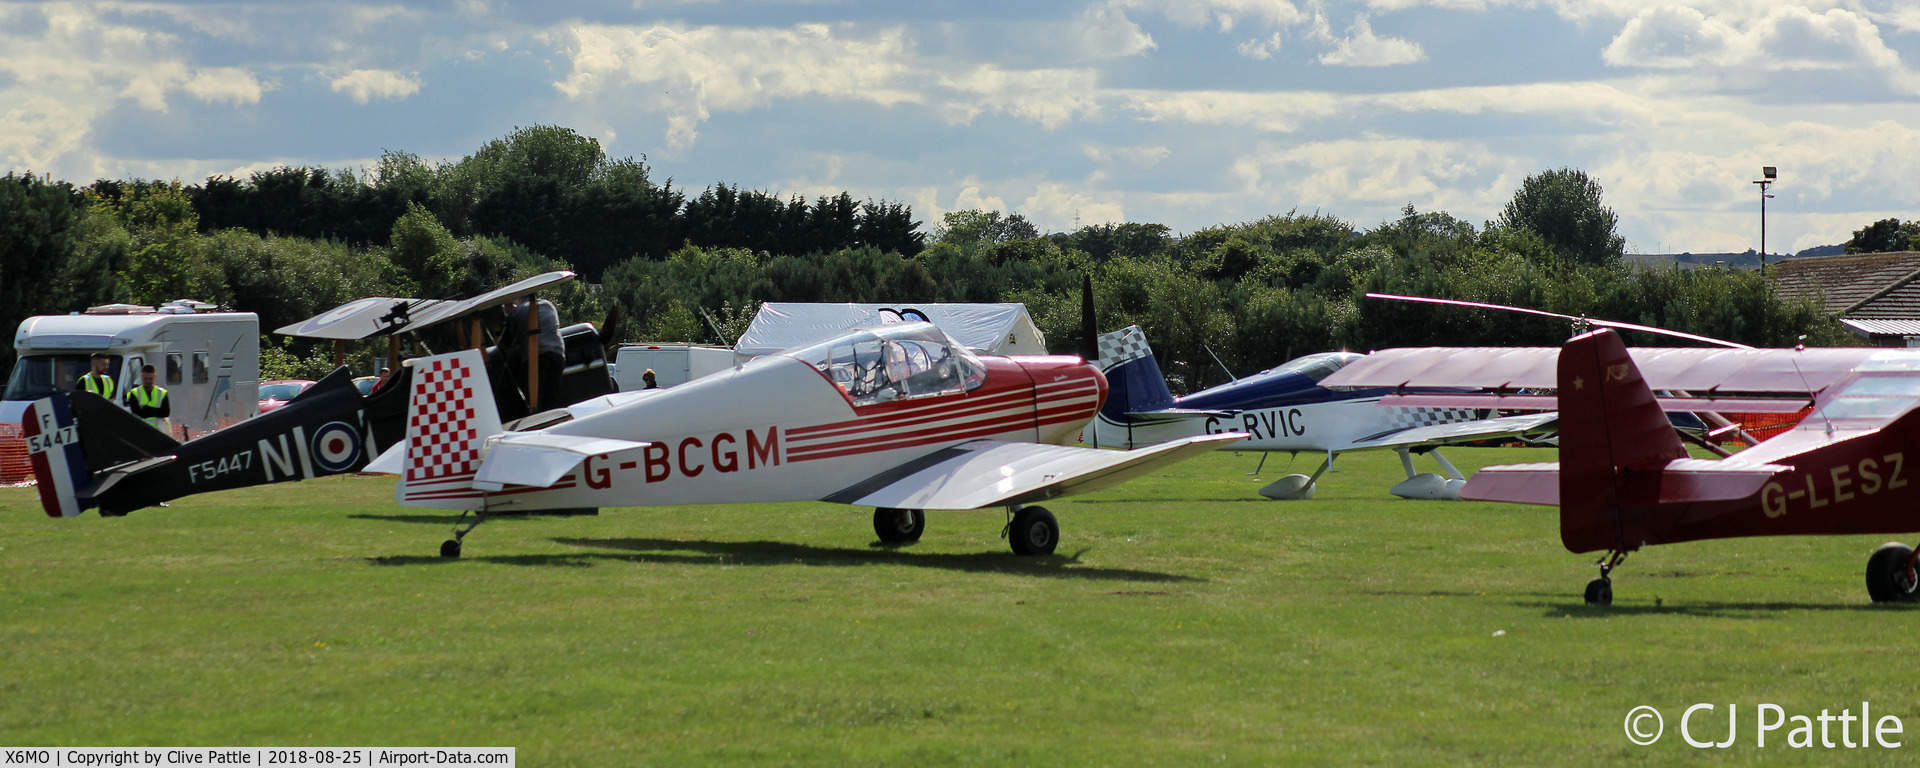 X6MO Airport - Aircraft line-up on the the site of the former RFC Station at Montrose, Angus, Scotland. The event was the Montrose Air Station Heritage Centre light aircraft fly-in held on 25th August 2018.